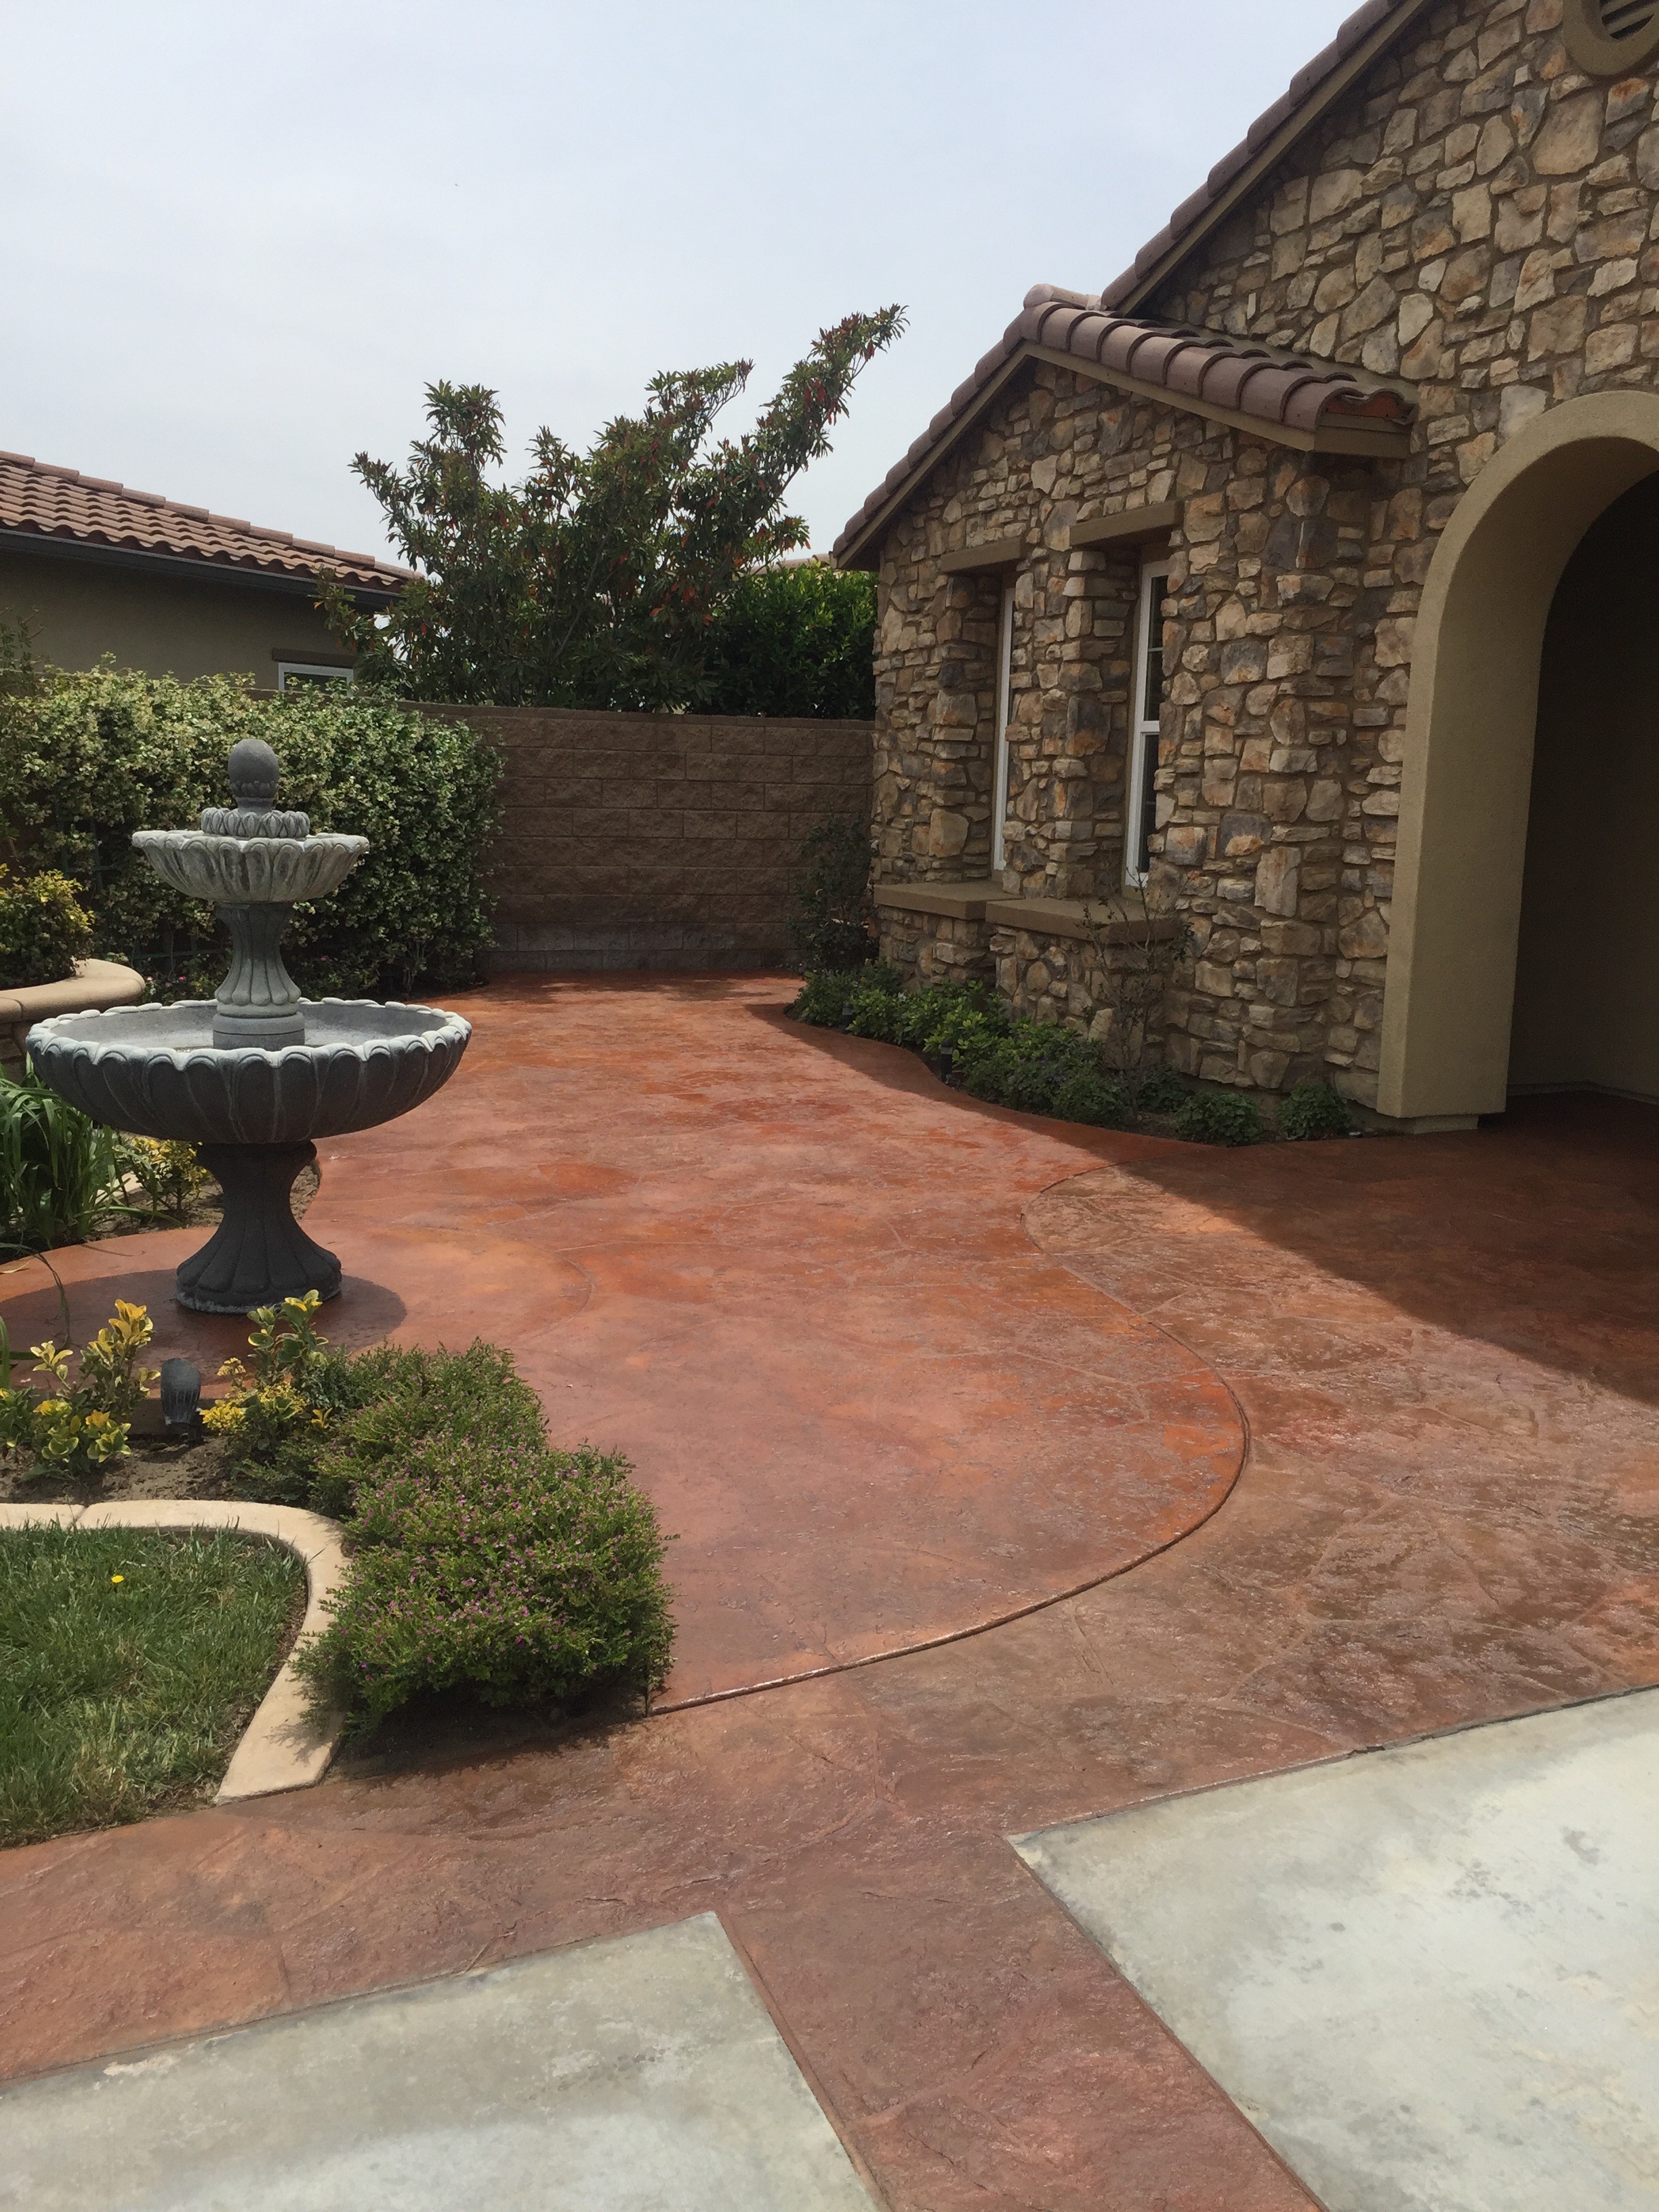 Which Is Better For Coloring A Concrete Patio Paint Or Stain Fuller Staining - What Is The Best Paint For Cement Patios